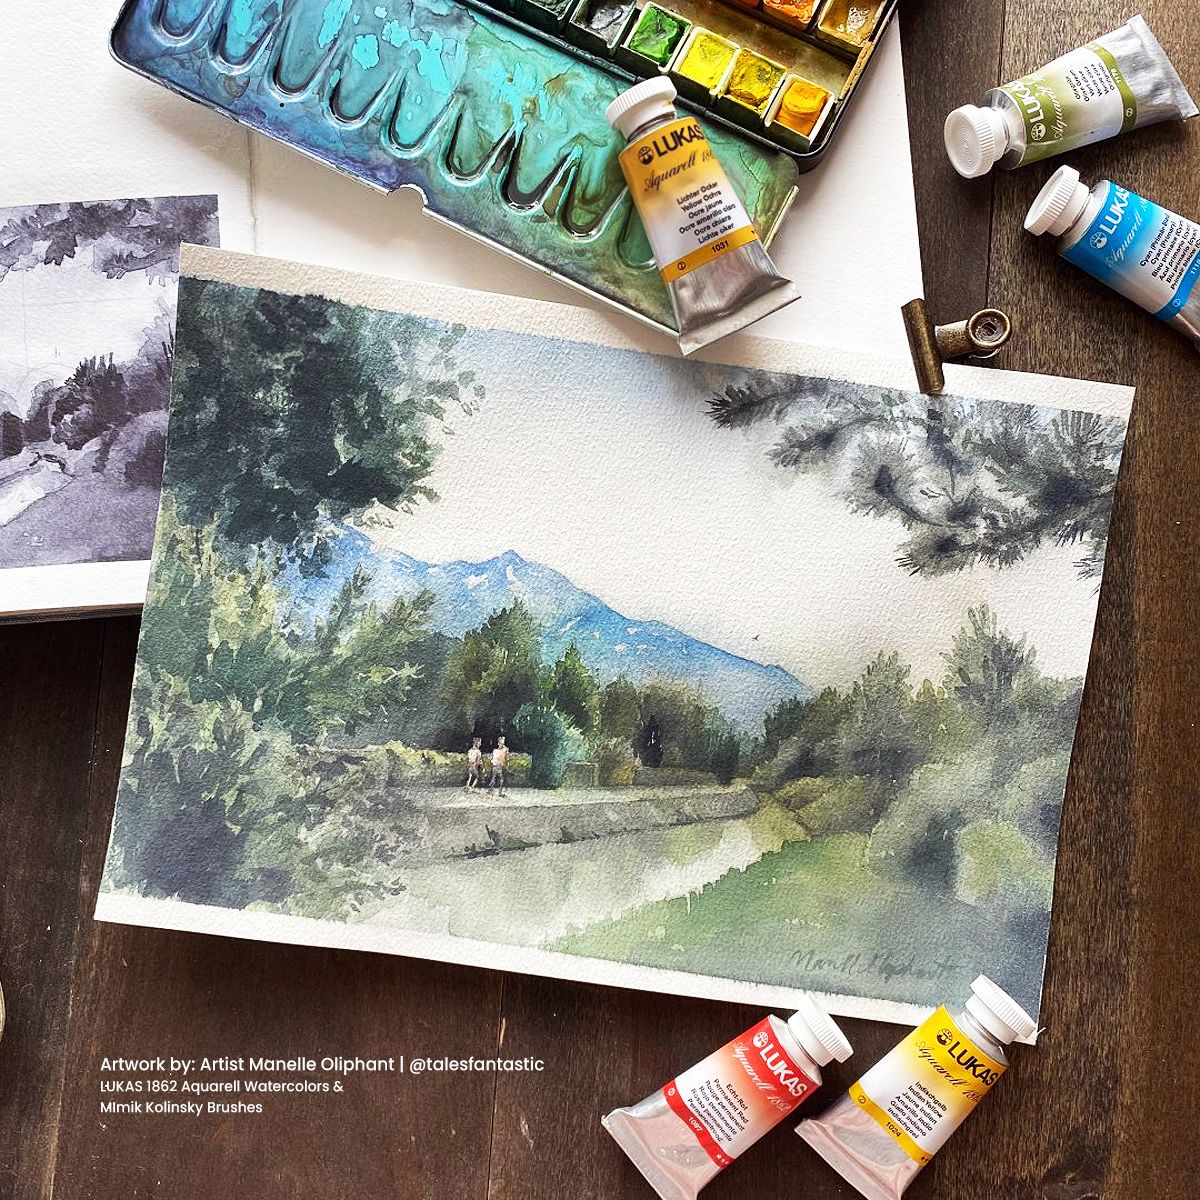 Plein air watercolor painting by @carstenwieland